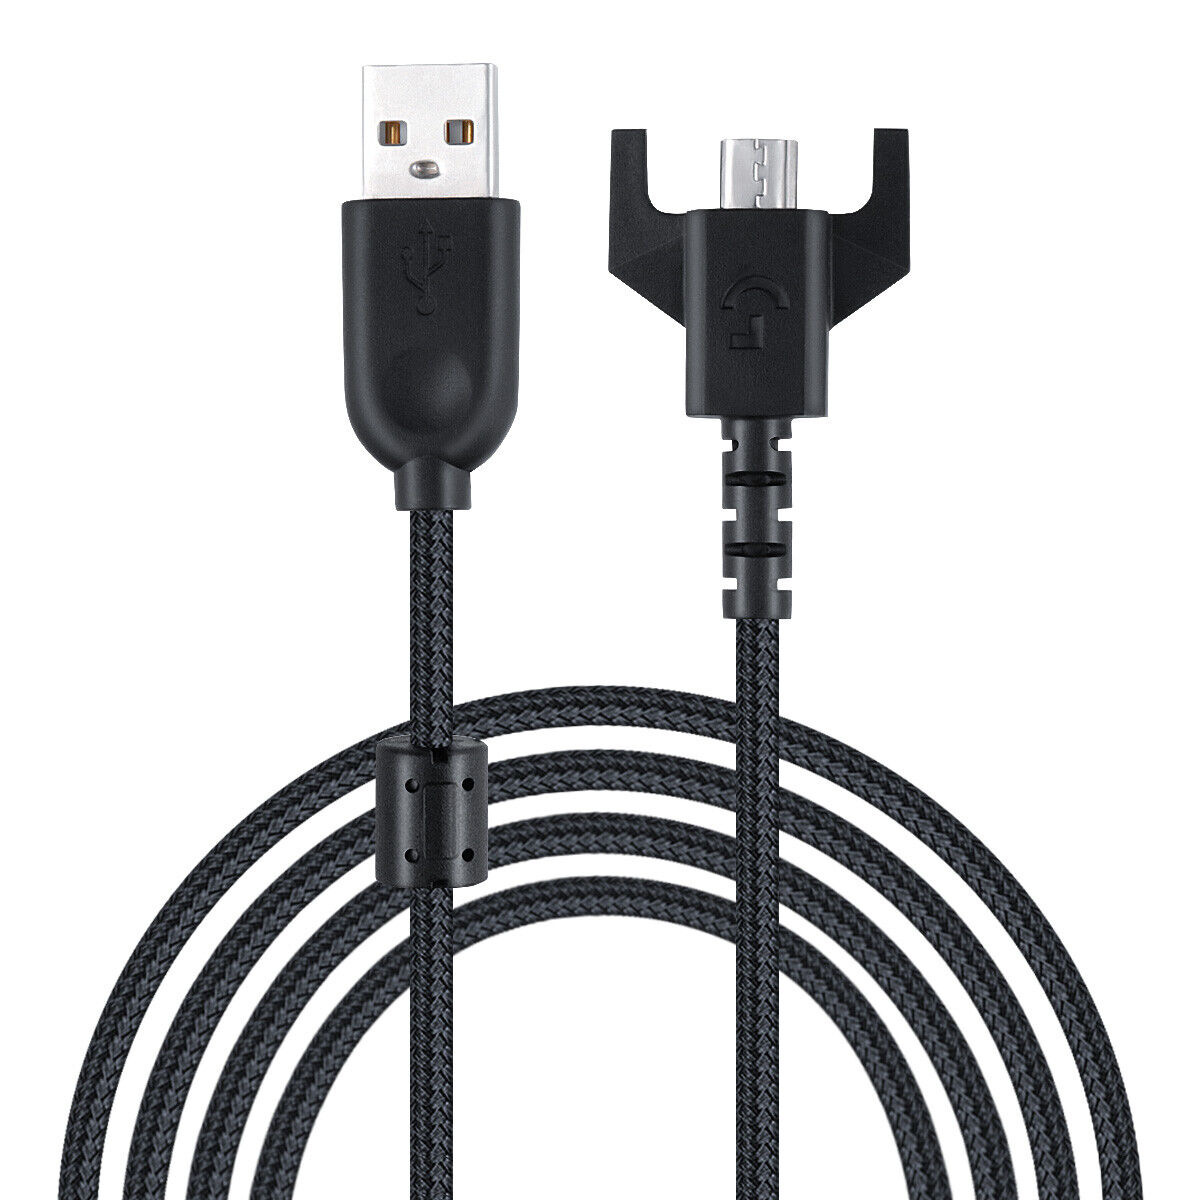 USB Charging Cable cord for Logitech G403 G703 G903 G900 GPro GPX Wireless Mouse